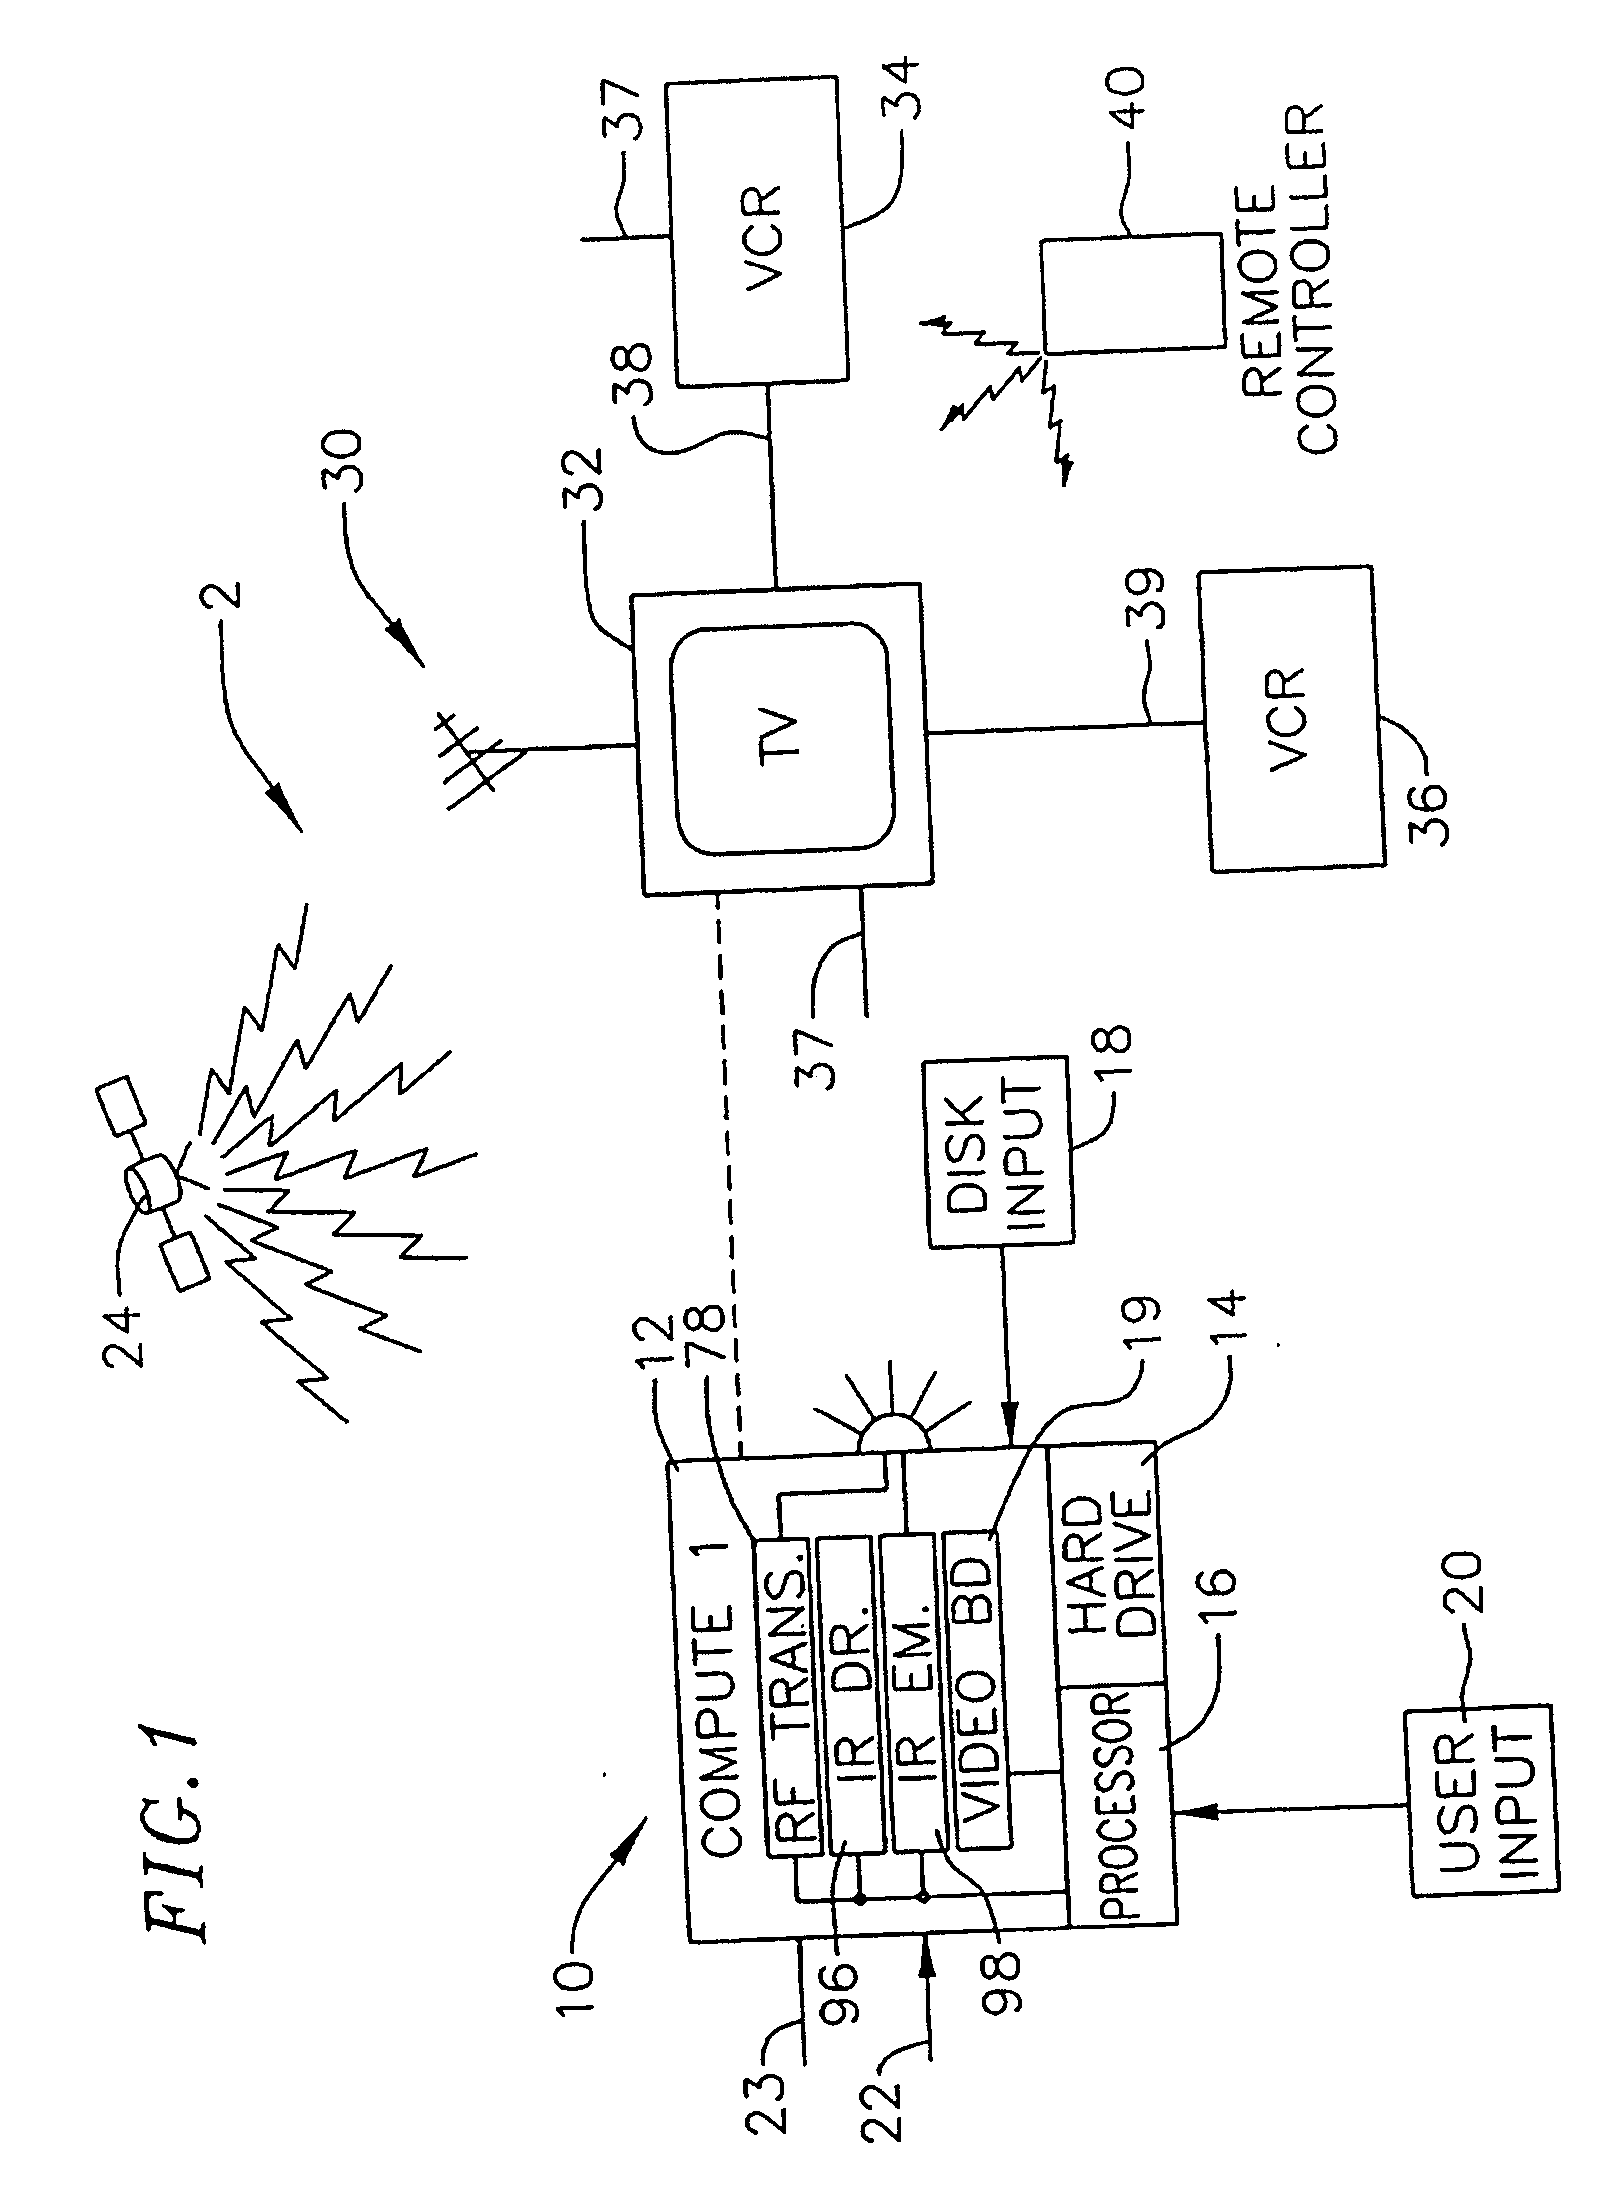 Systems and methods for contextually linking television program information